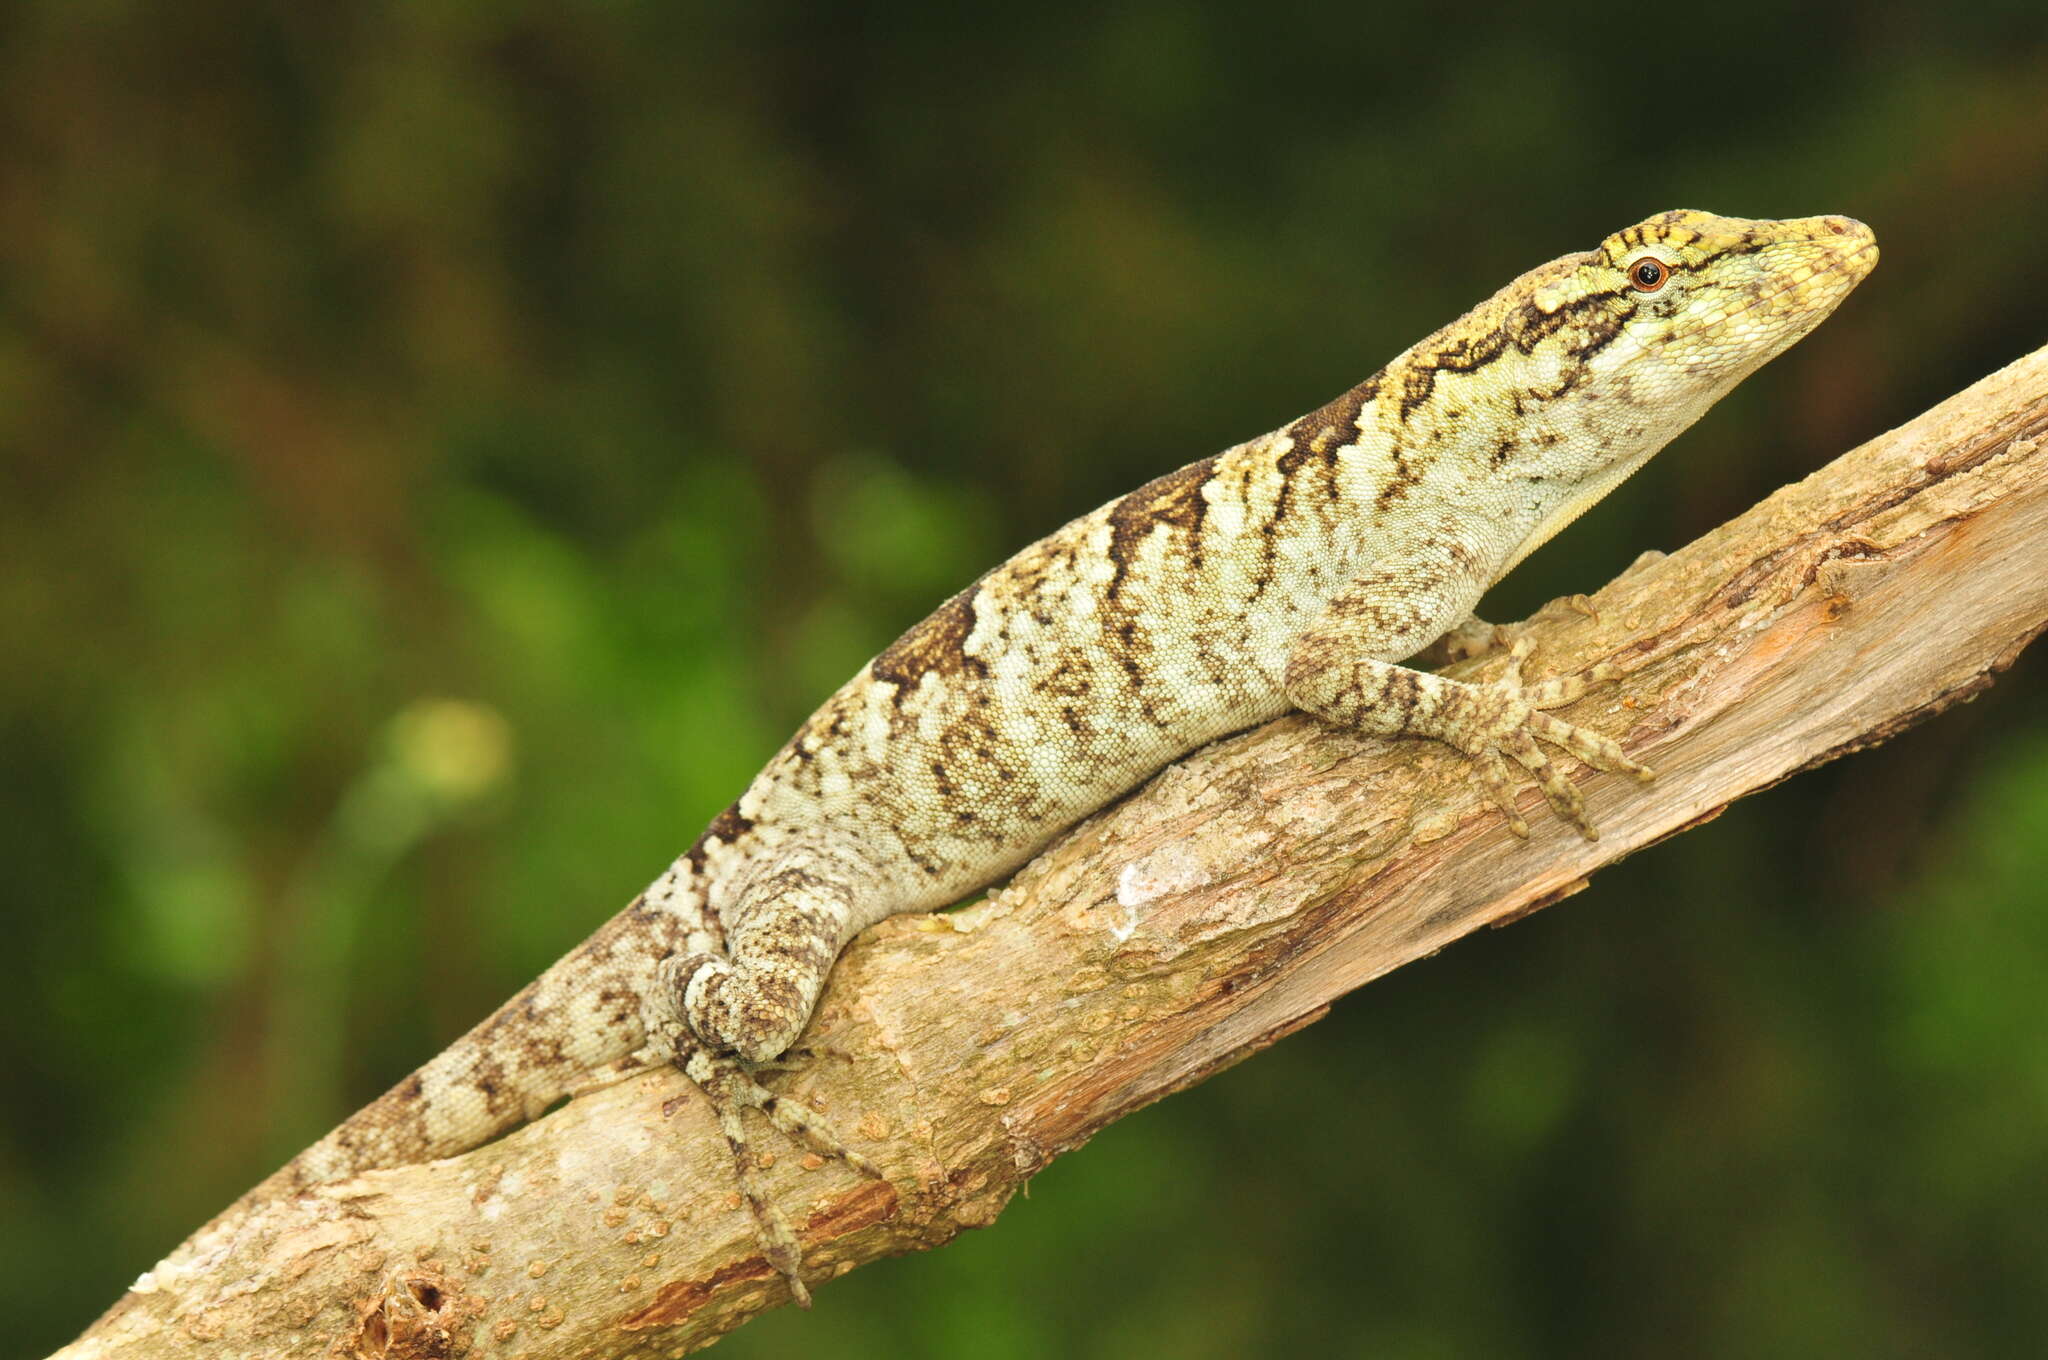 Image of Peters' anole